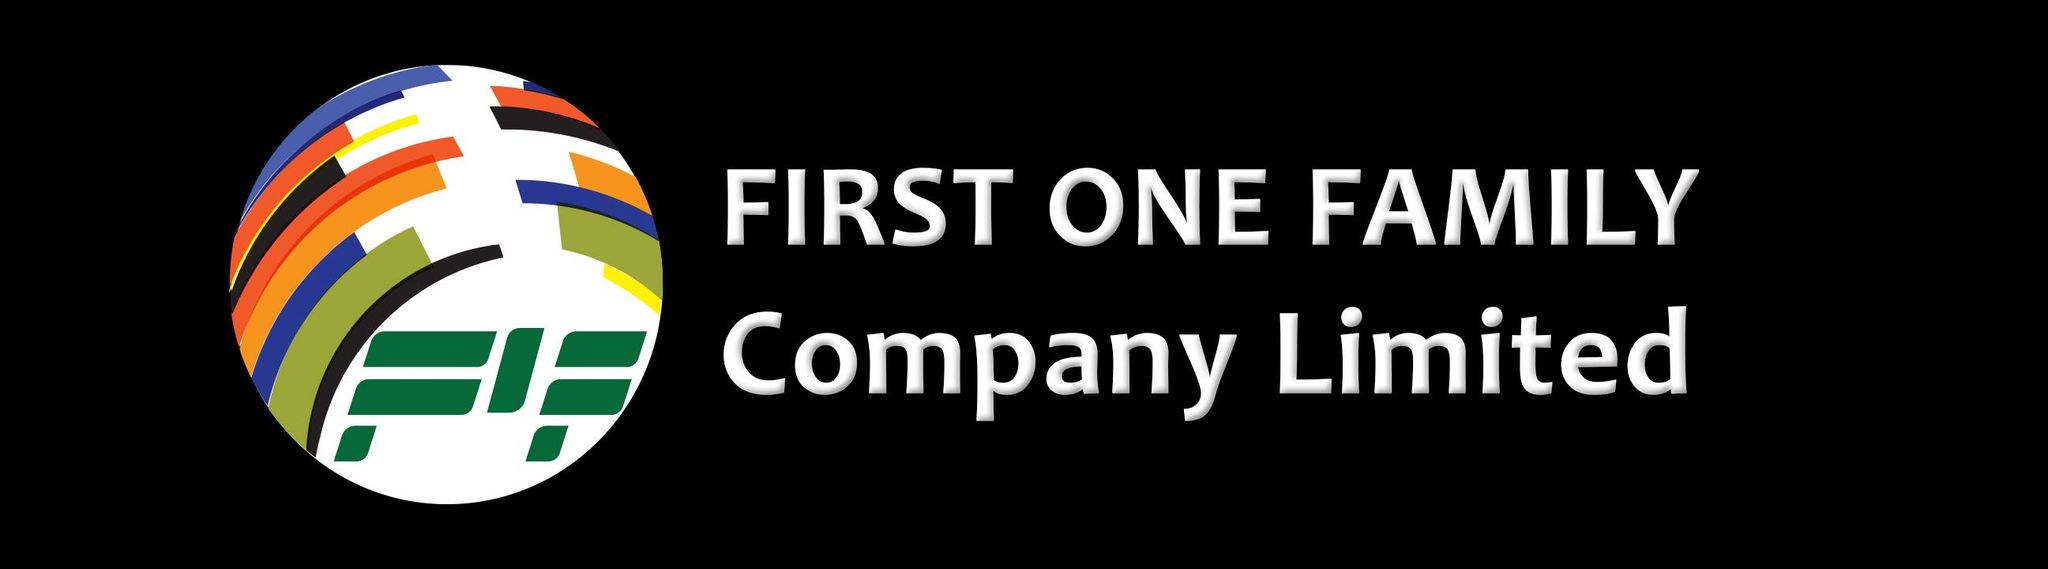 First One Family Co.,Ltd.